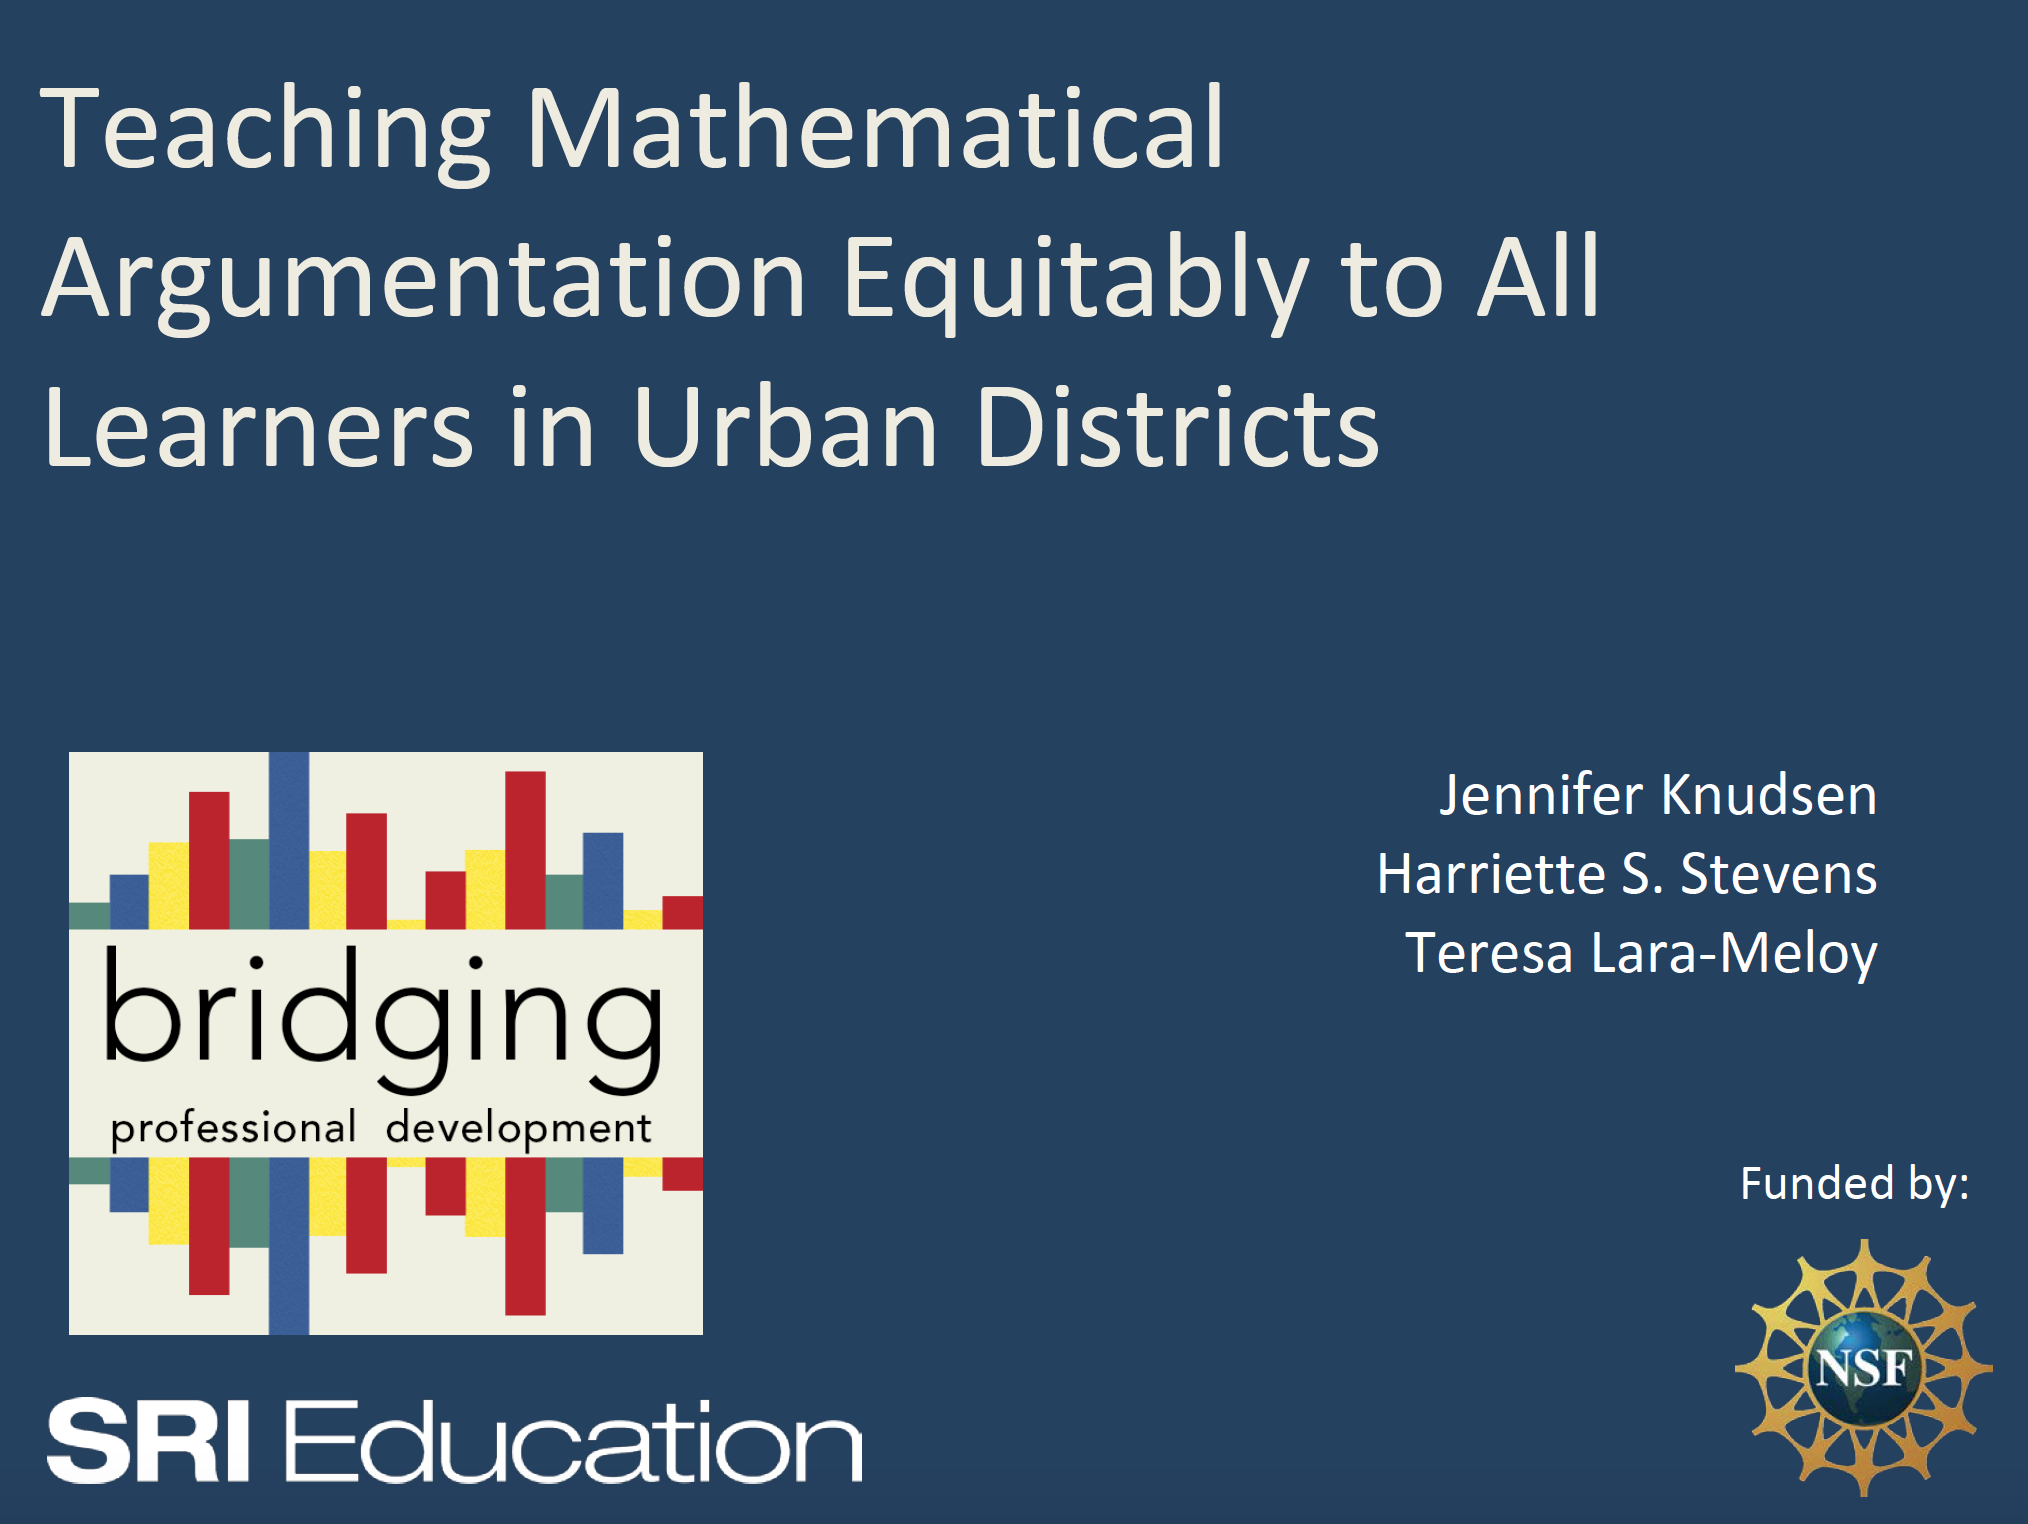 Teaching Mathematics Equitably to All Learners in Urban Districts
